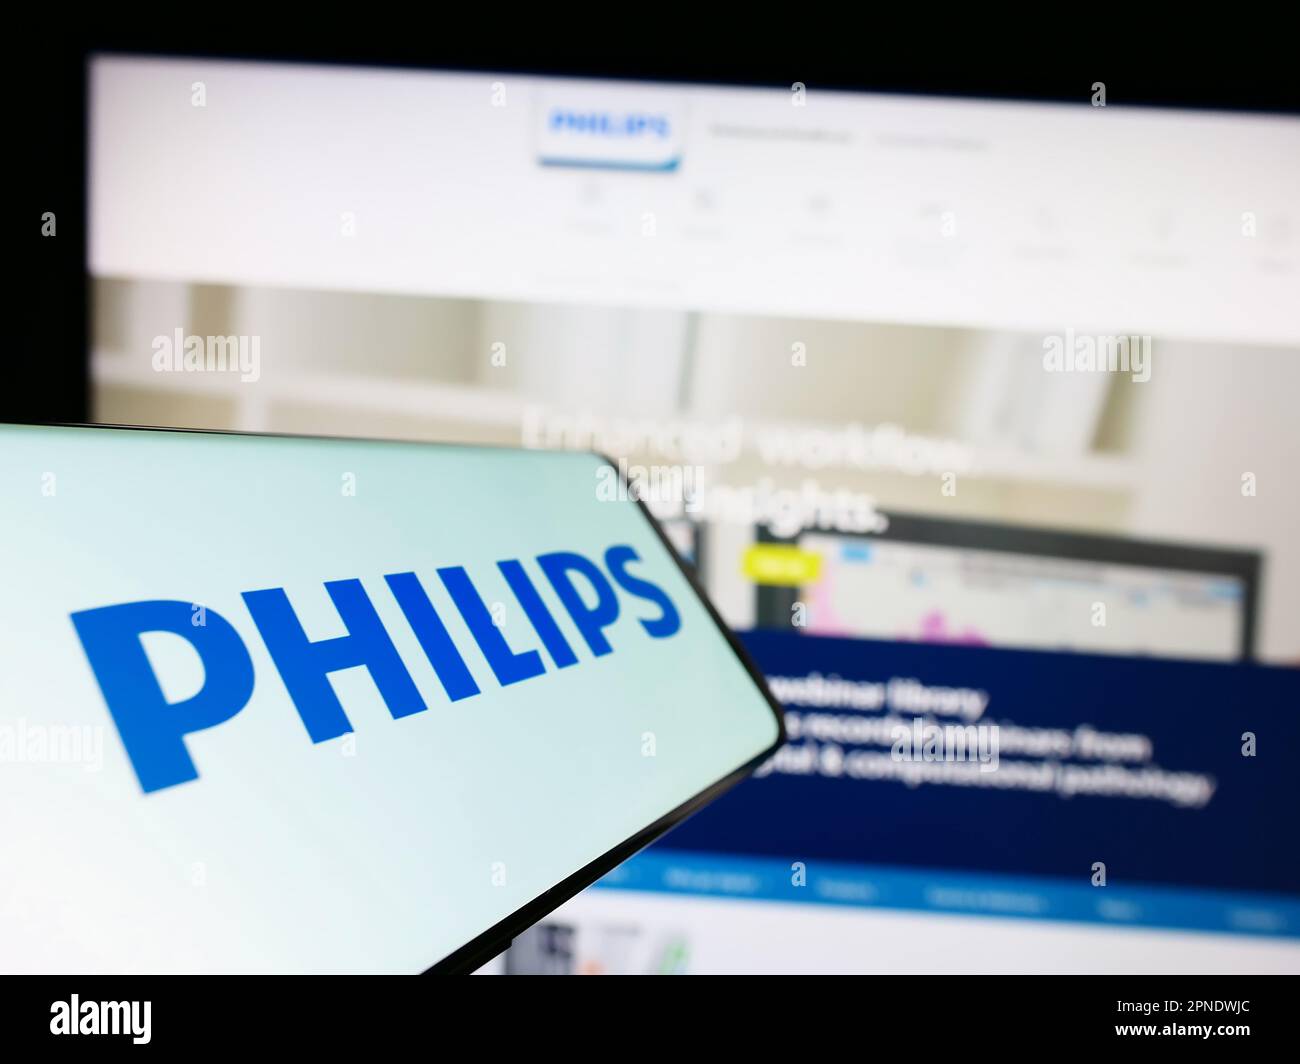 Smartphone with logo of Dutch company Koninklijke Philips N.V. on screen in front of business website. Focus on center-left of phone display. Stock Photo